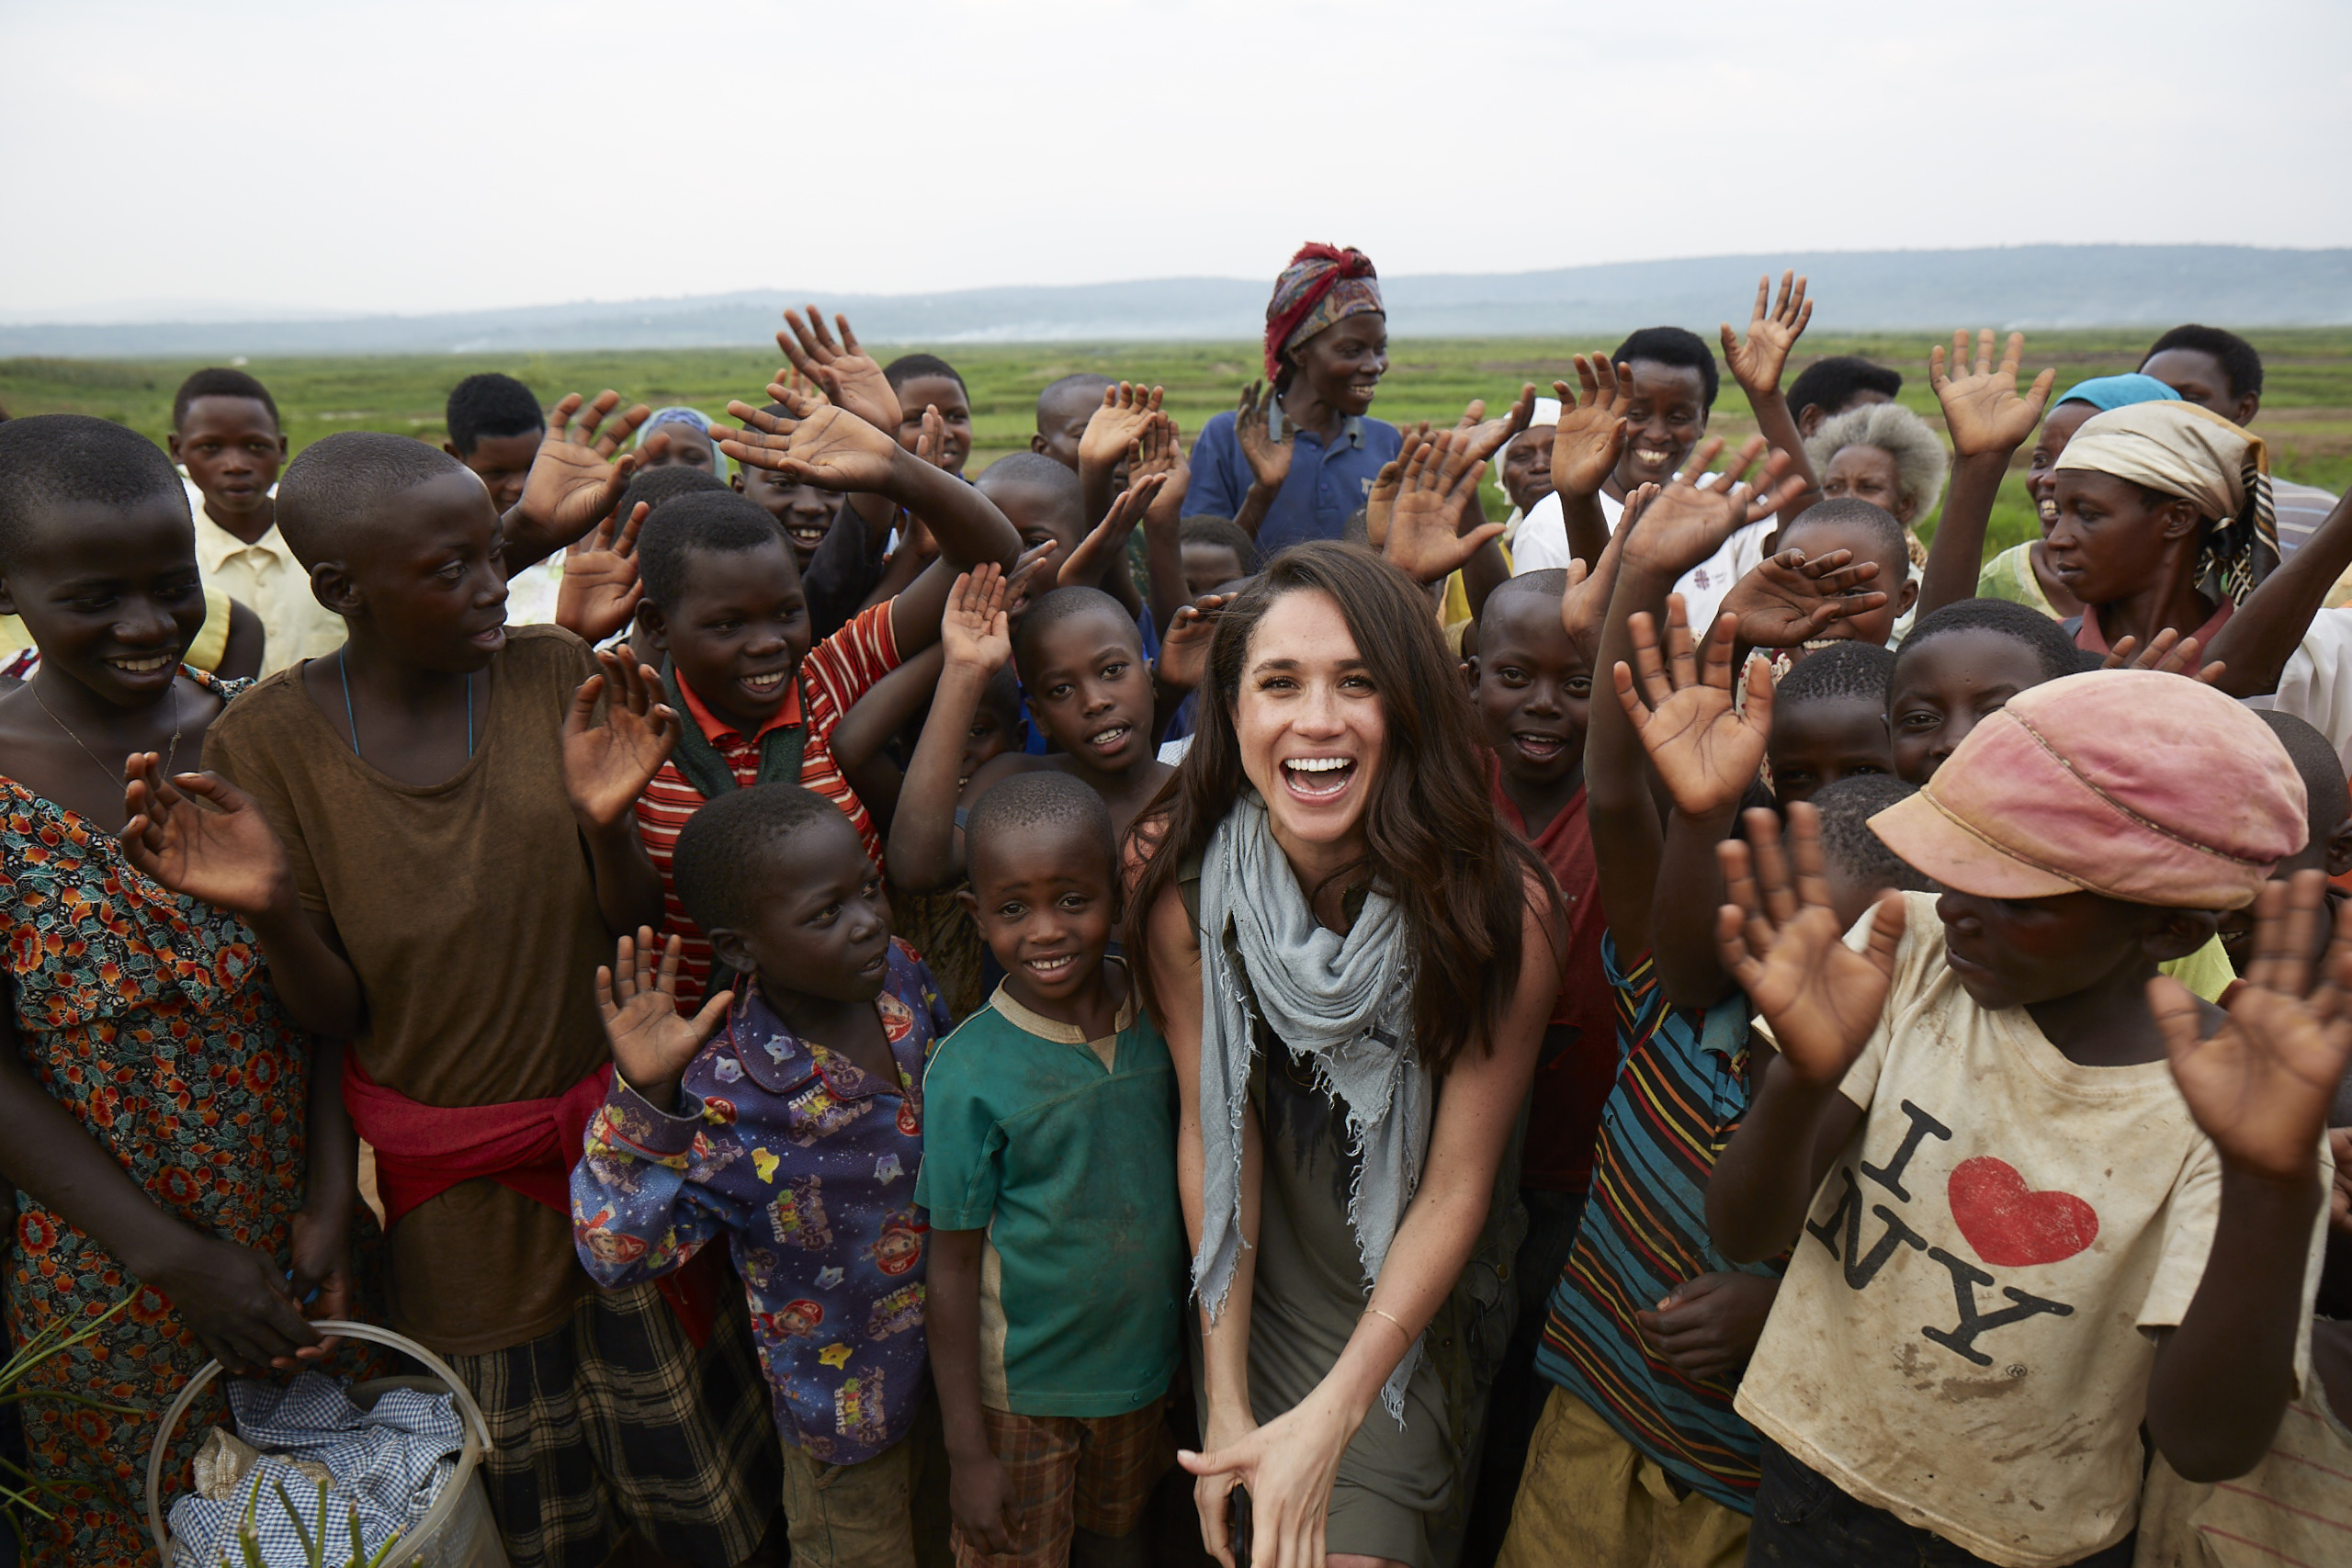 PHOTO: Meghan Markle has been an outspoken humanitarian. She became a global ambassador for the charity, World Vision, after visiting a rural area of Rwanda in 2016.